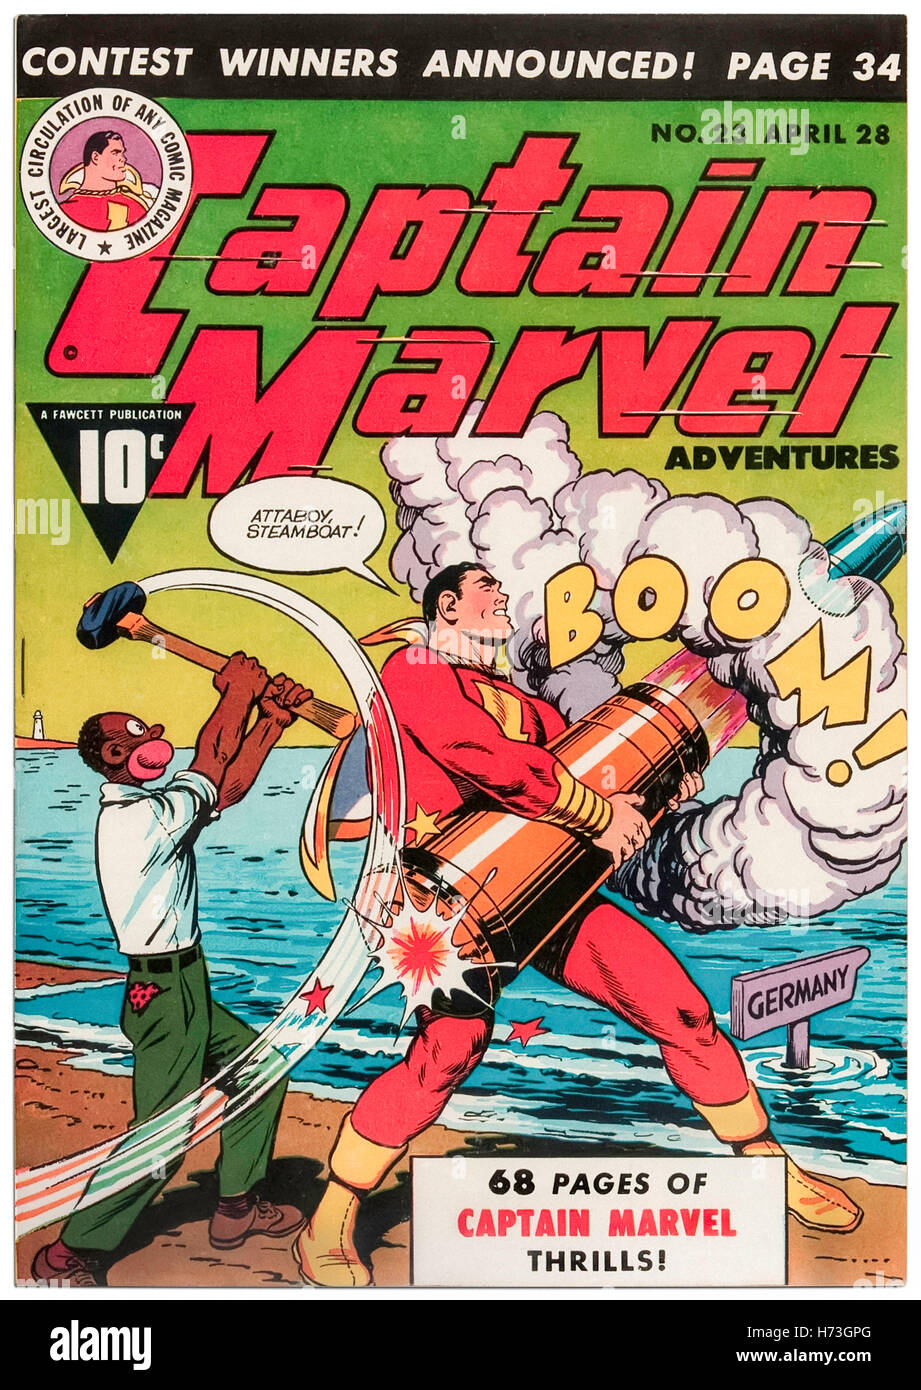 Captain Marvel Adventures Issue 23 April 1943, featuring cover art by C. C. Beck (1910-1989) published by Fawcett Comics featuring ‘Steamboat’ a racial stereotype of an African-American. The publishers issued guidelines in 1942 to eliminate offensive or subversive content; Steamboat was retired in 1945. Stock Photo